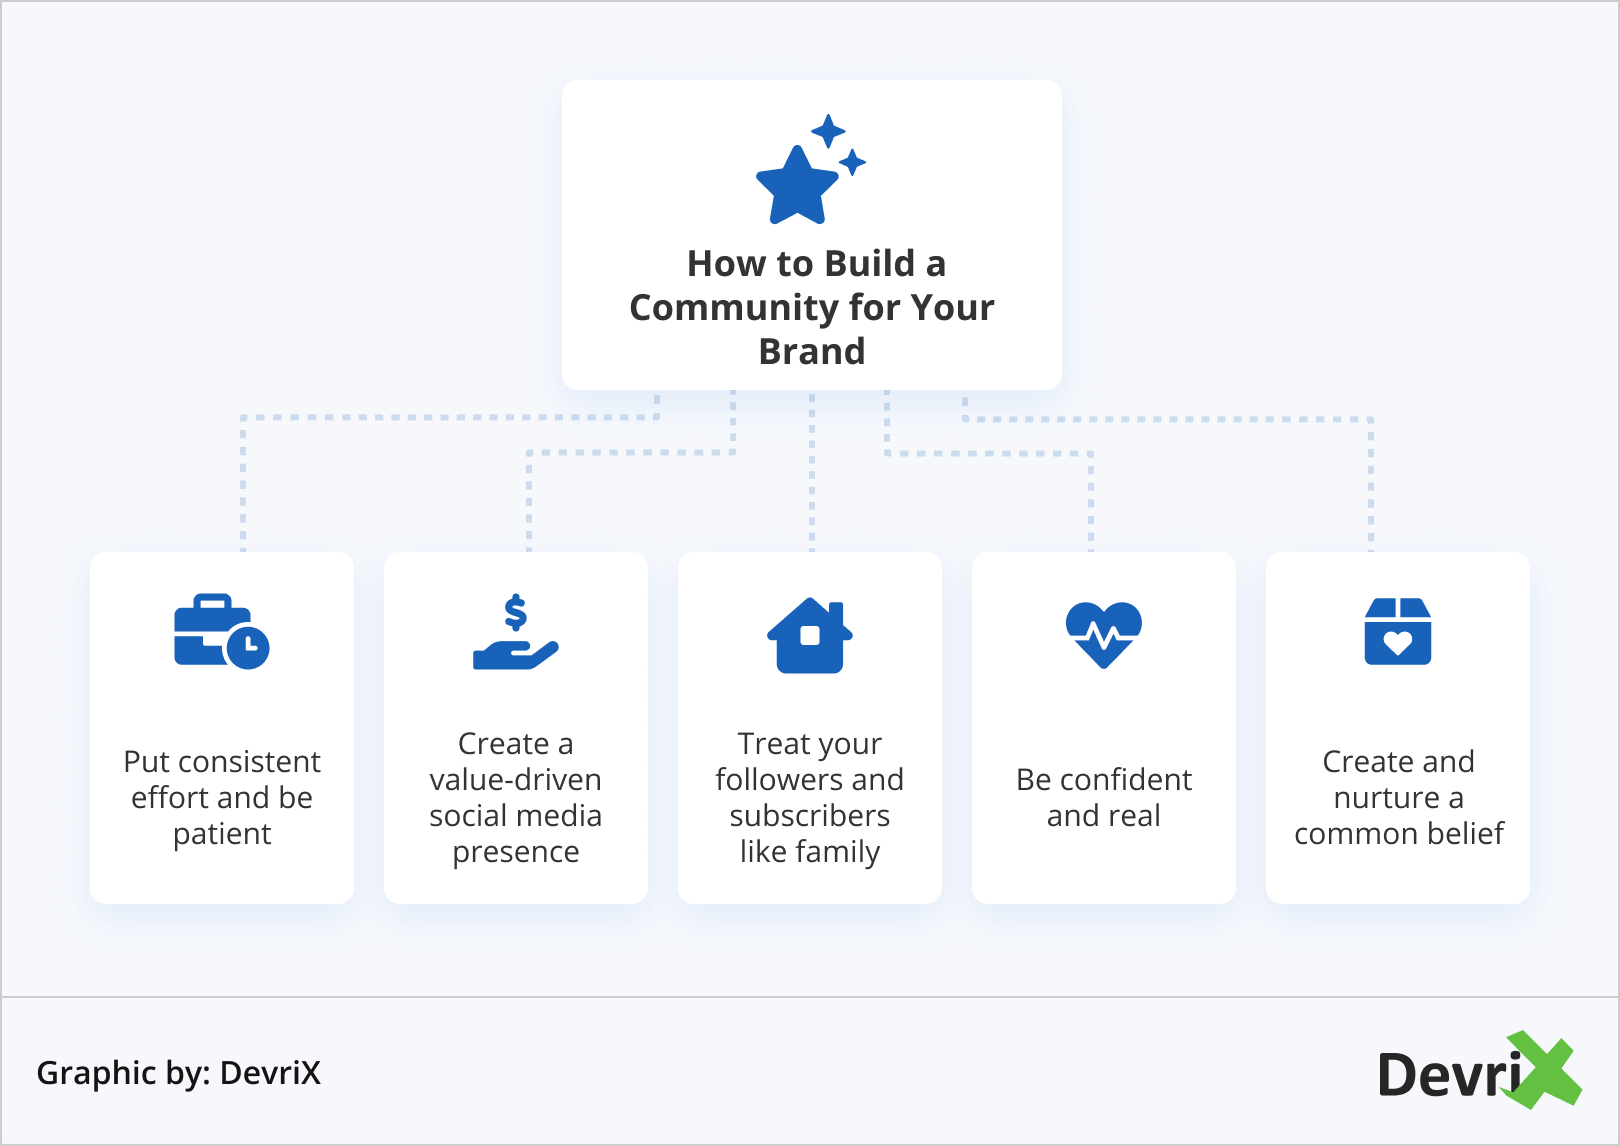 How to Build a Community for Your Brand